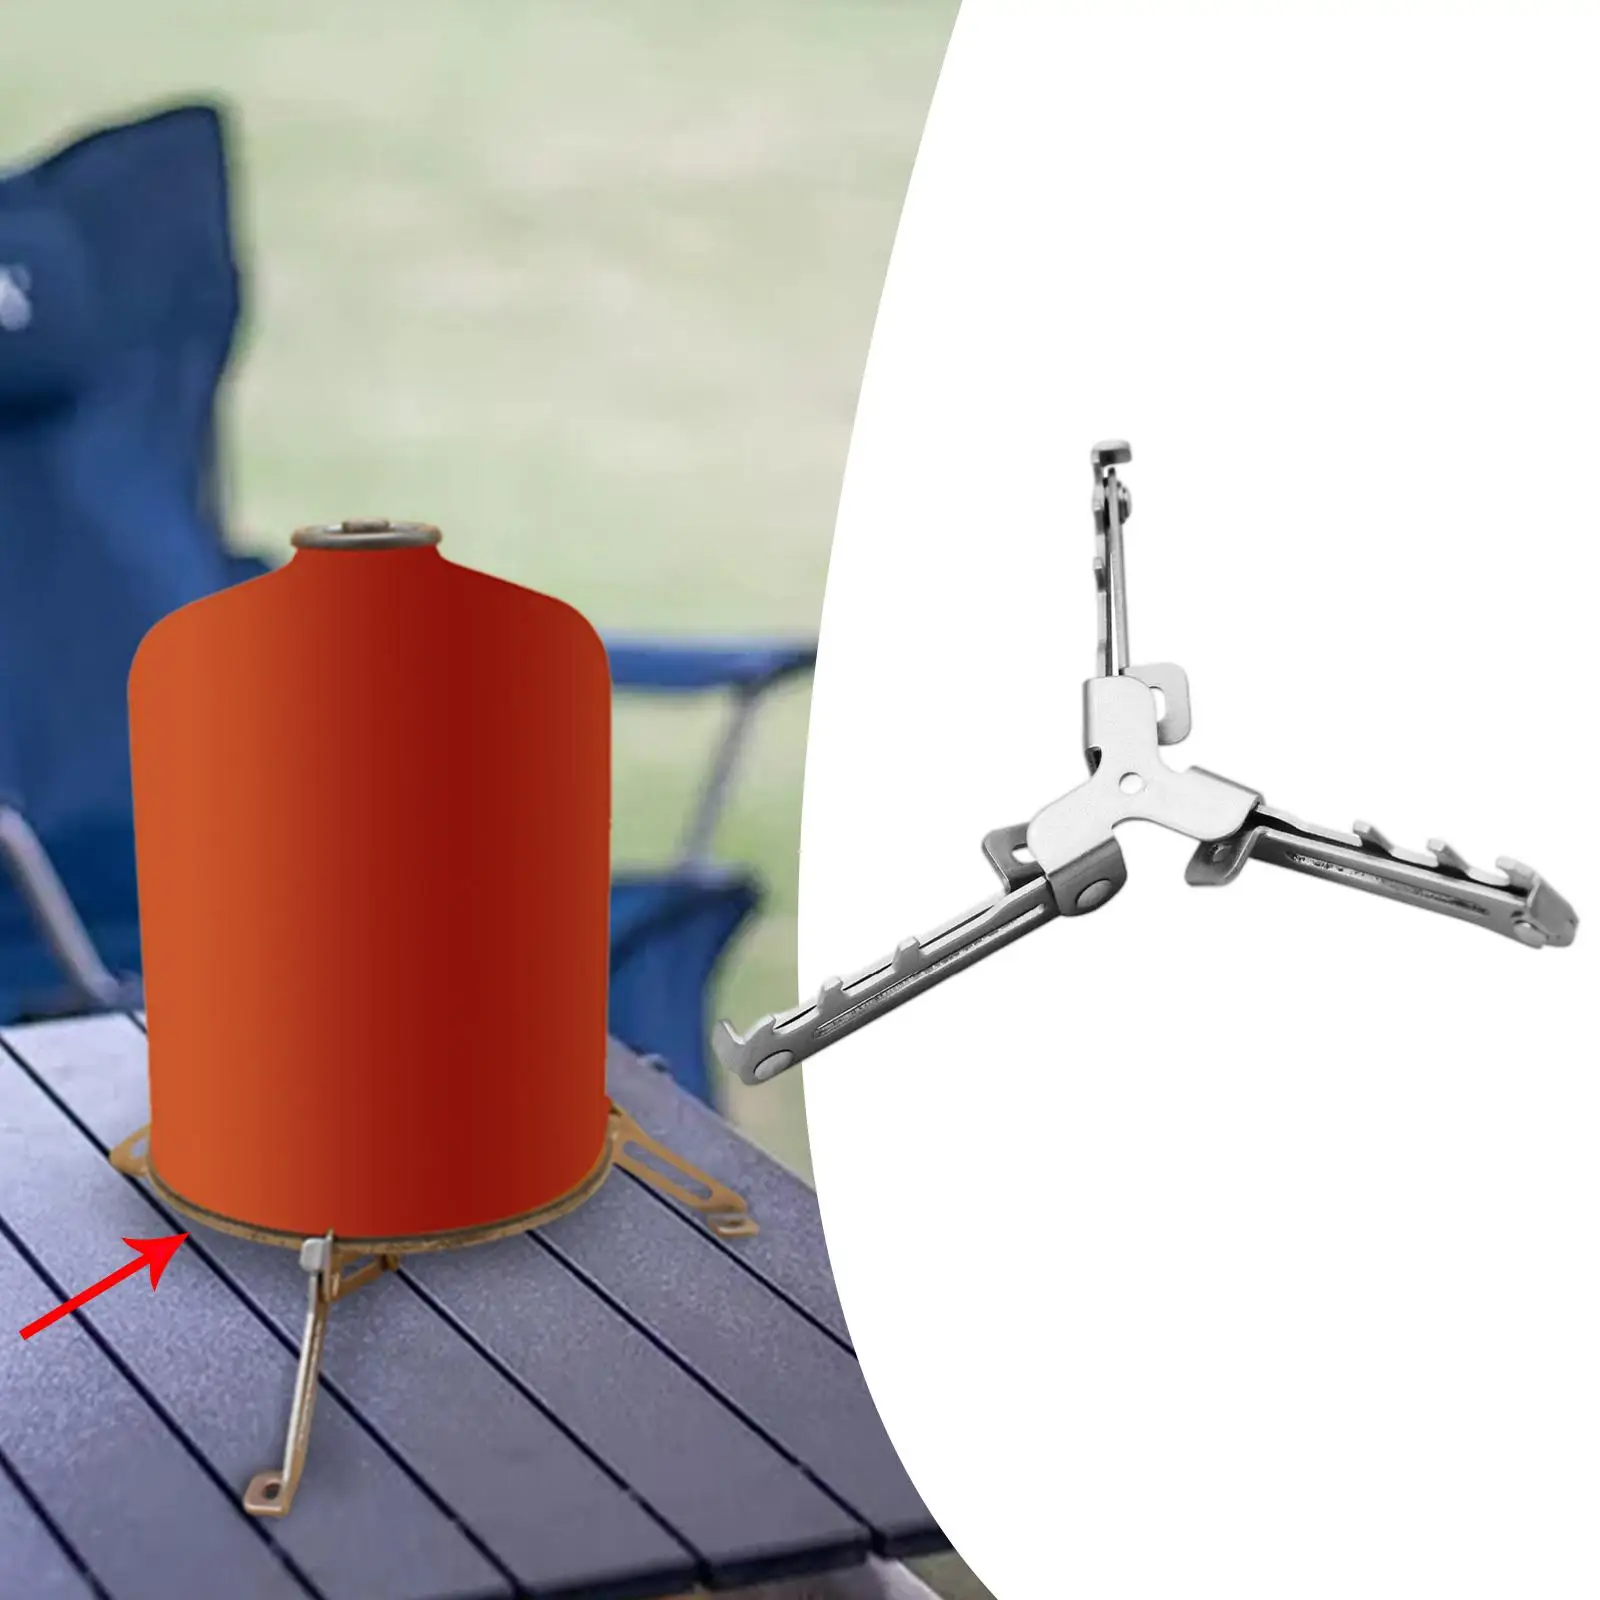 Foldable Gas Tank Stand Stove Bottle Shelf Tripod Base Stainless Steel